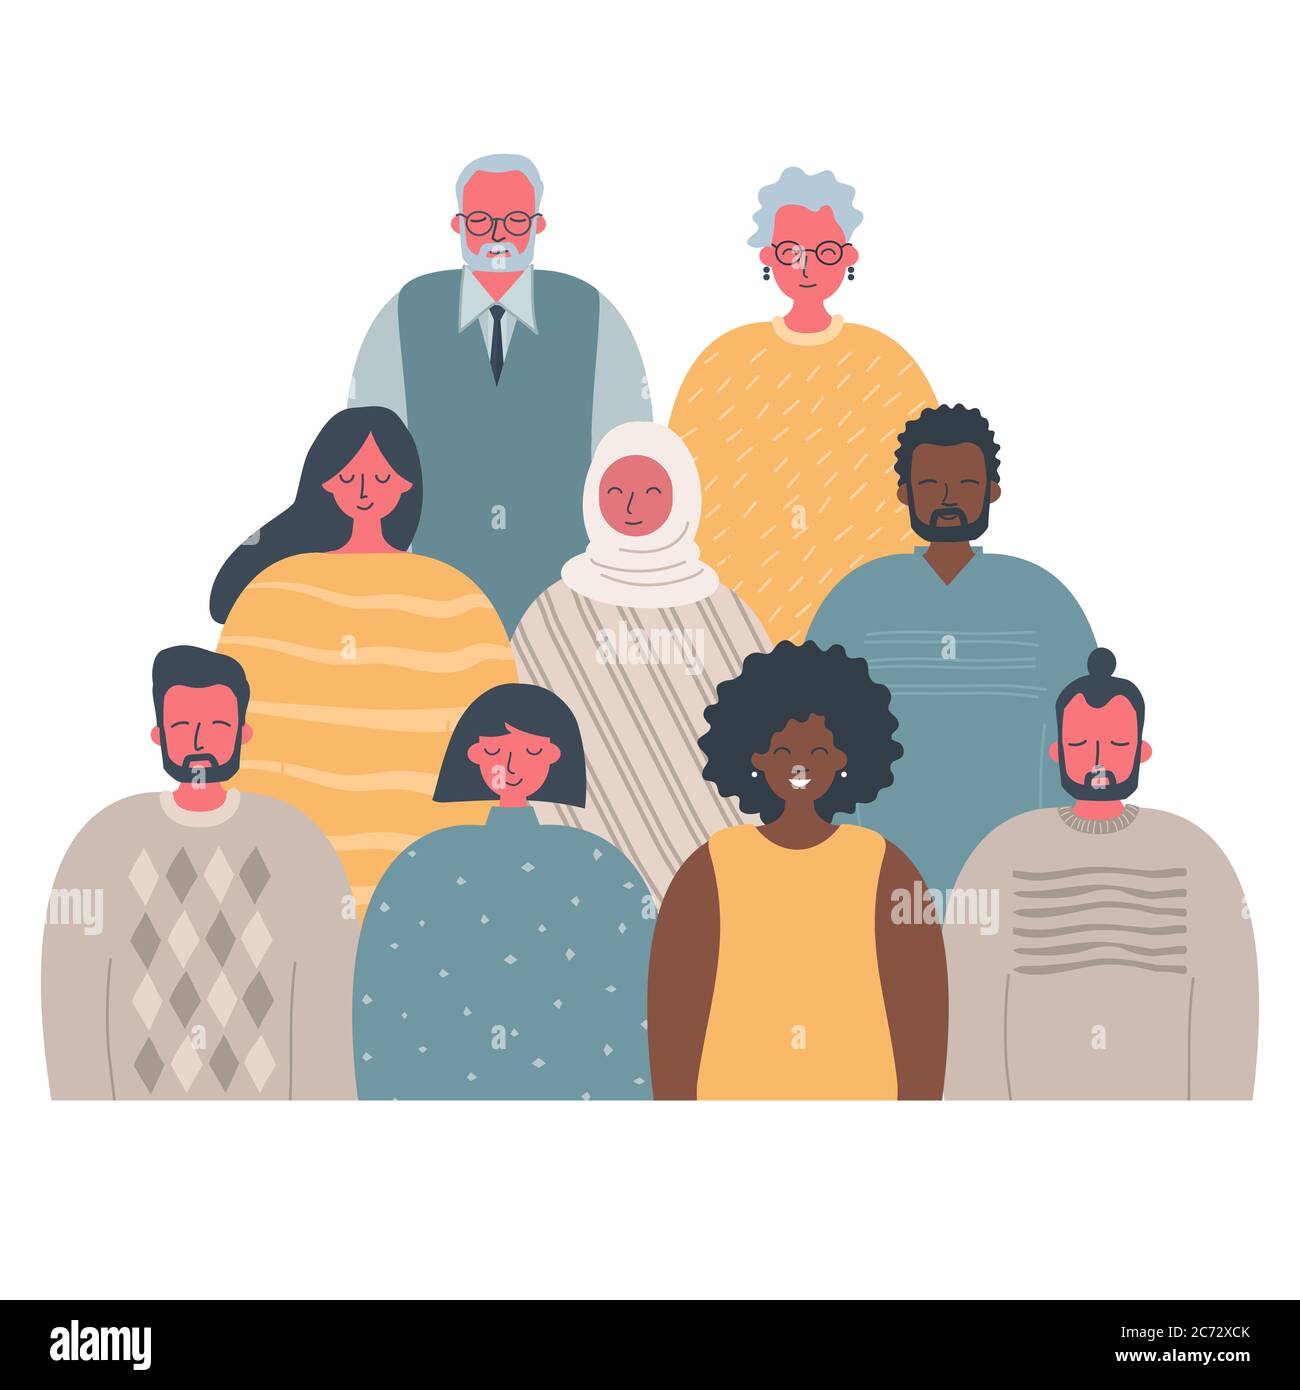 Community of people of different sexes, races and ages. International group of people. There are women, men, older people and young people here Stock Vector